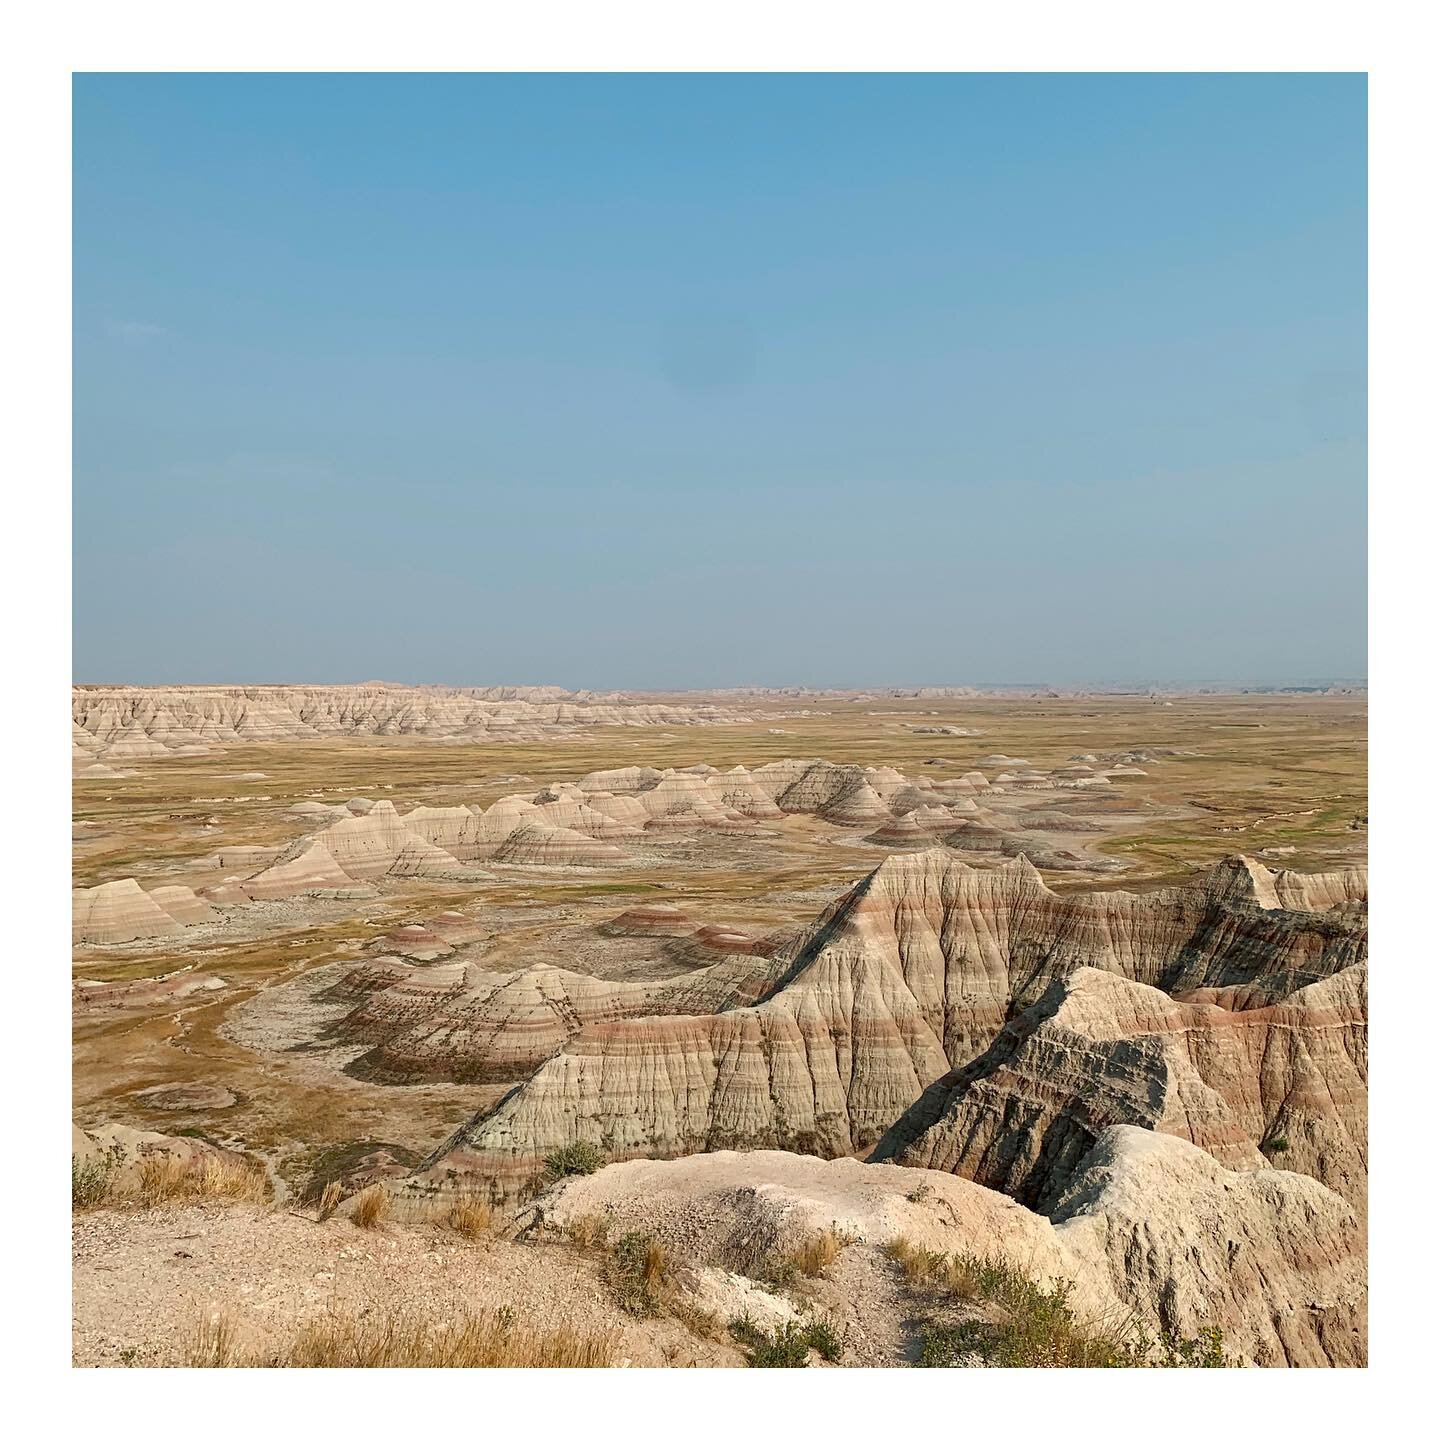 It&rsquo;s not nearby, but it. is. 💥
Badlands NP, Summer 2020